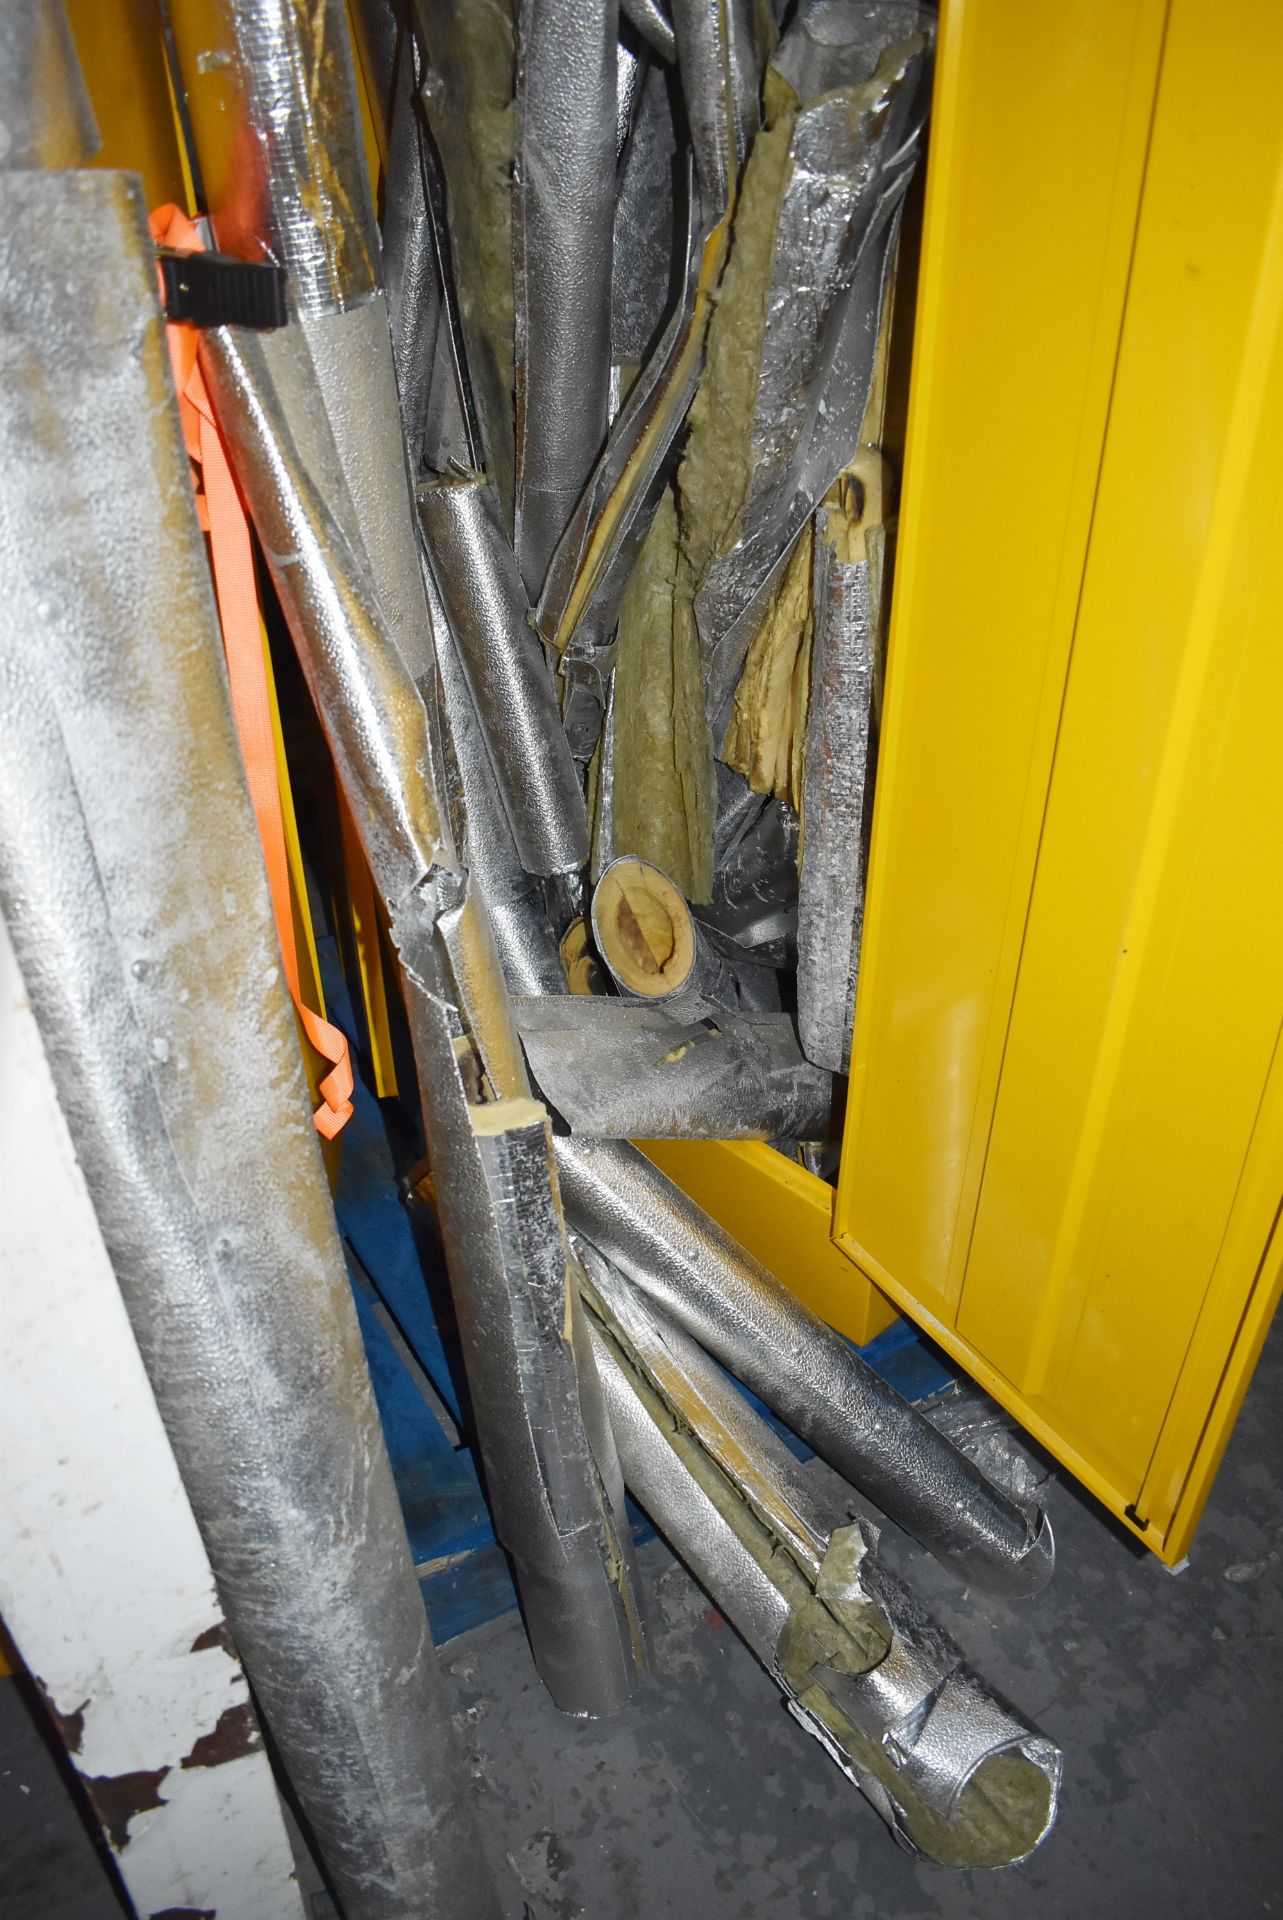 Large Quantity of Thermal Pipe Covering Contents of Two Upright Cabinets - Cabinets Not Included - - Image 4 of 10